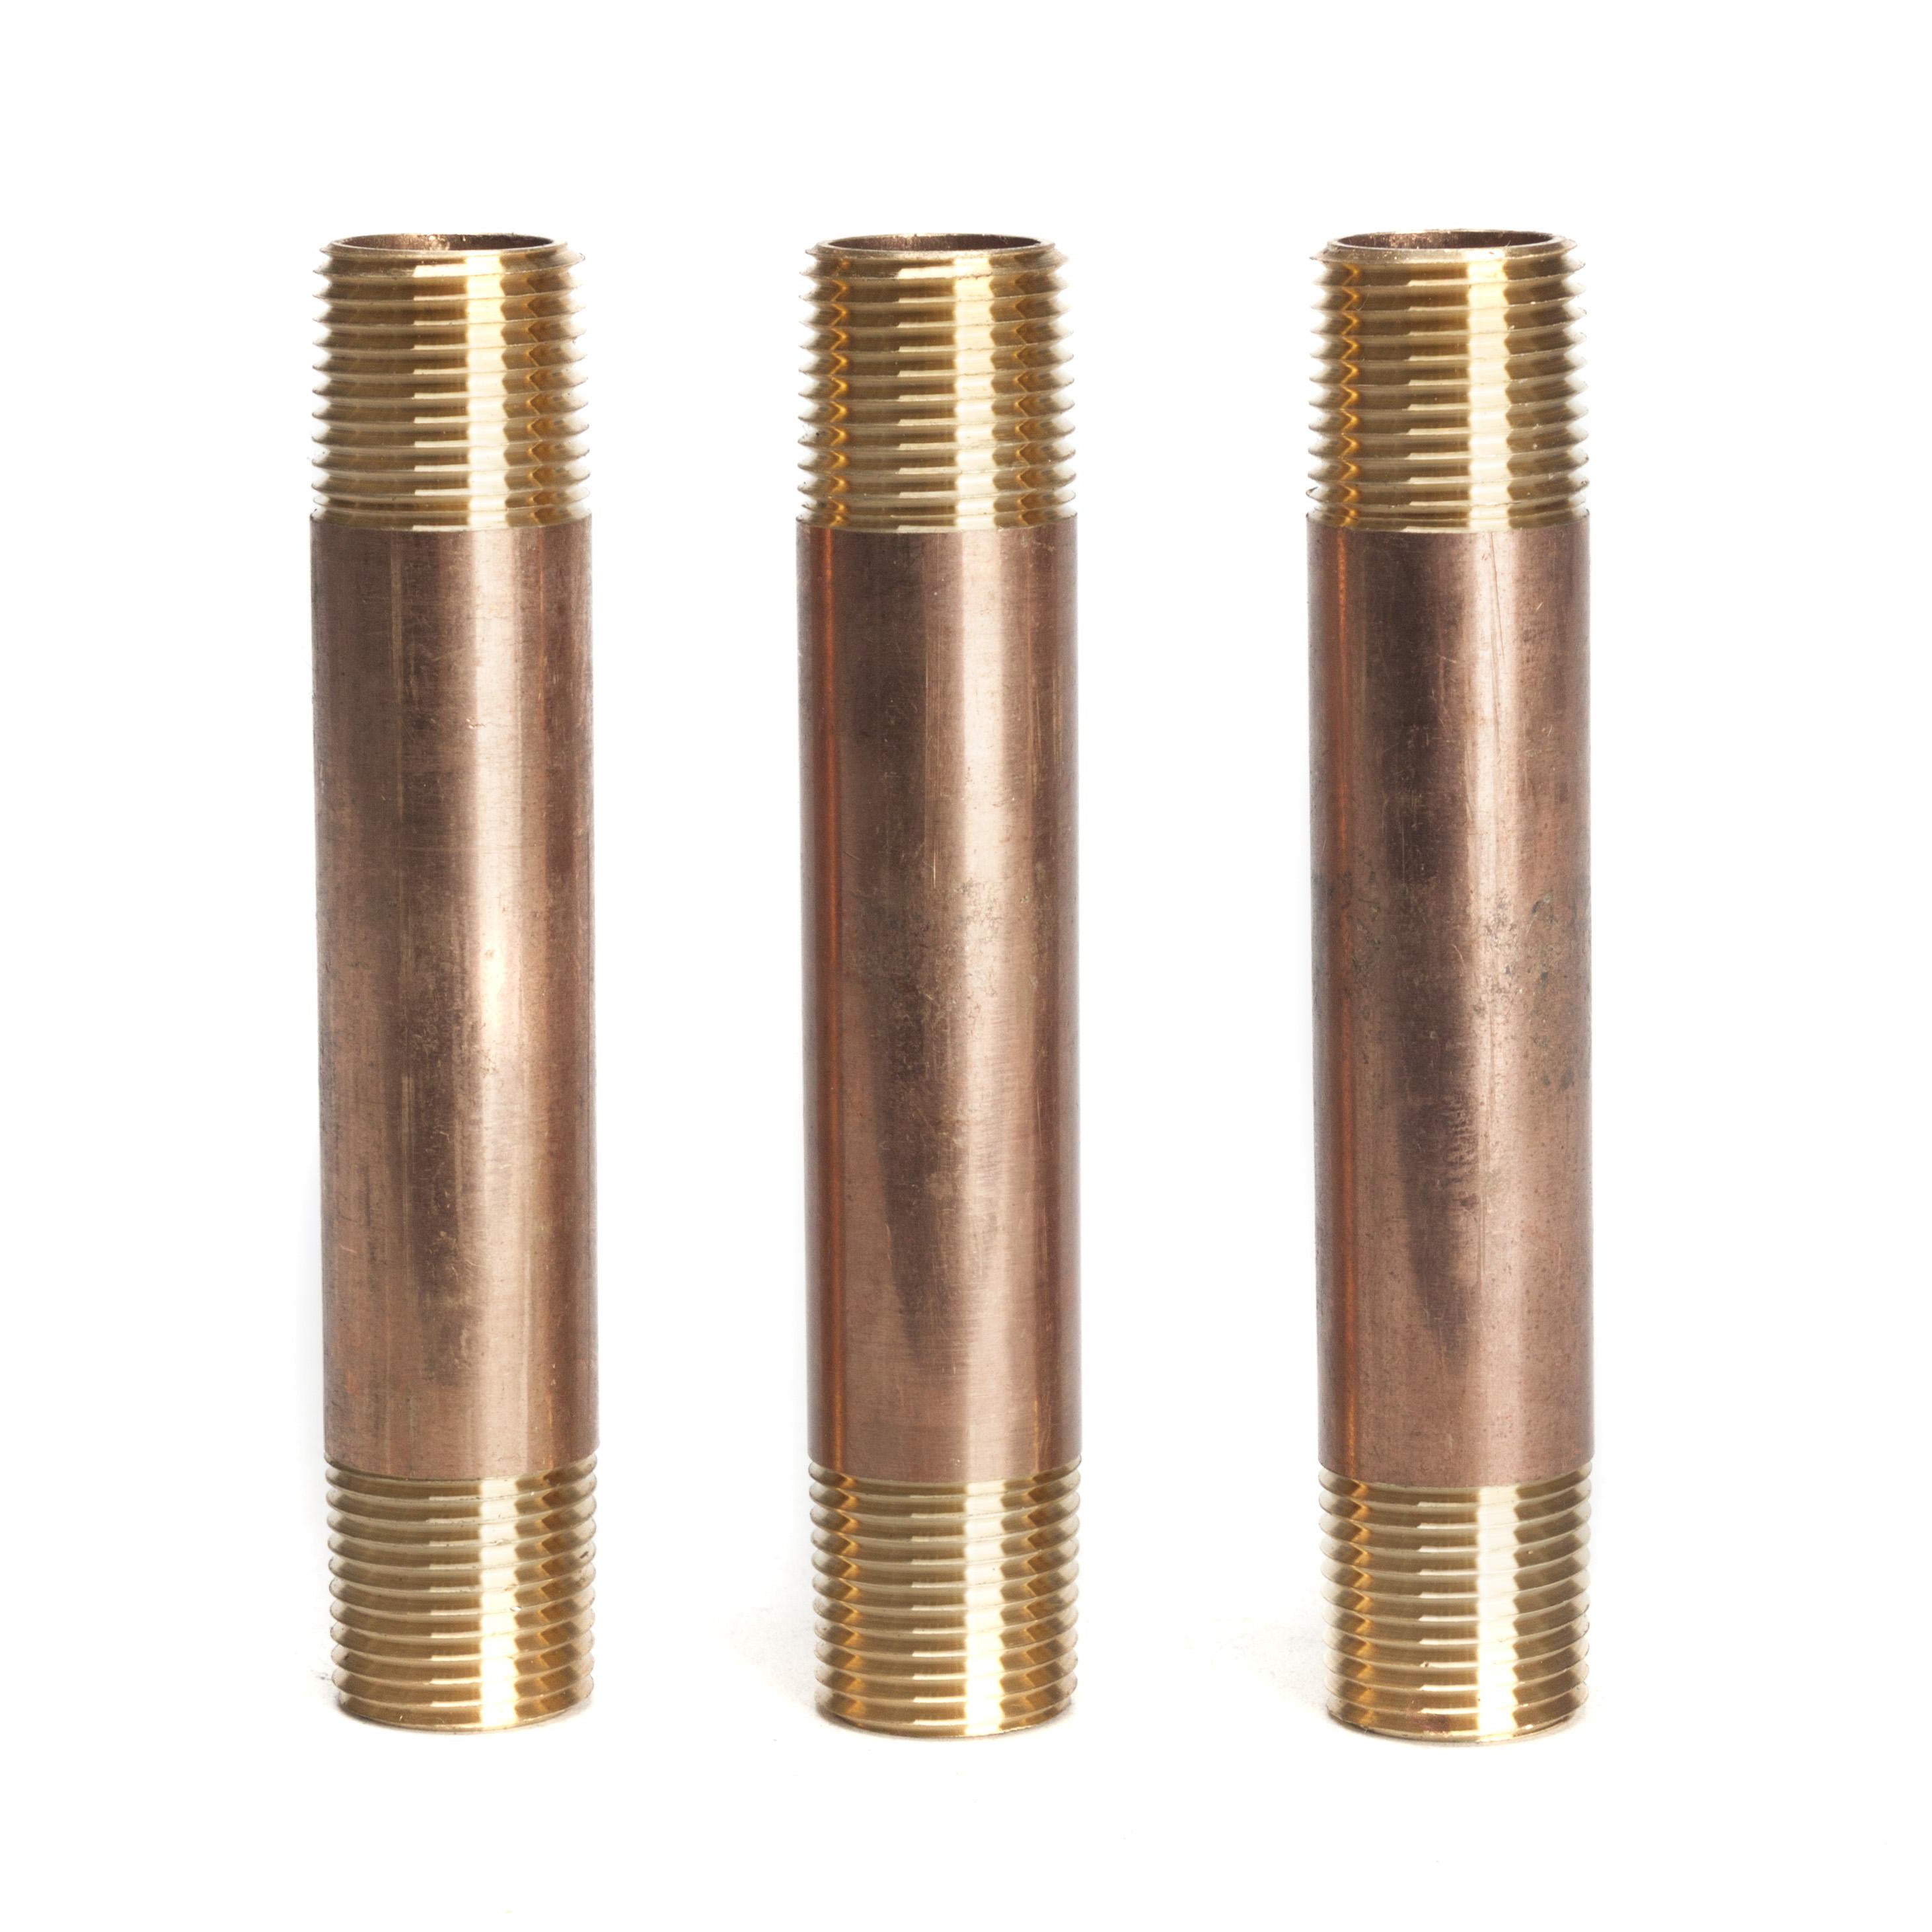 LTWFITTING Brass Pipe 4-1/2 Inch Long Nipples Fitting 1/2 Inch Male NPT Air Water(Pack of 3)